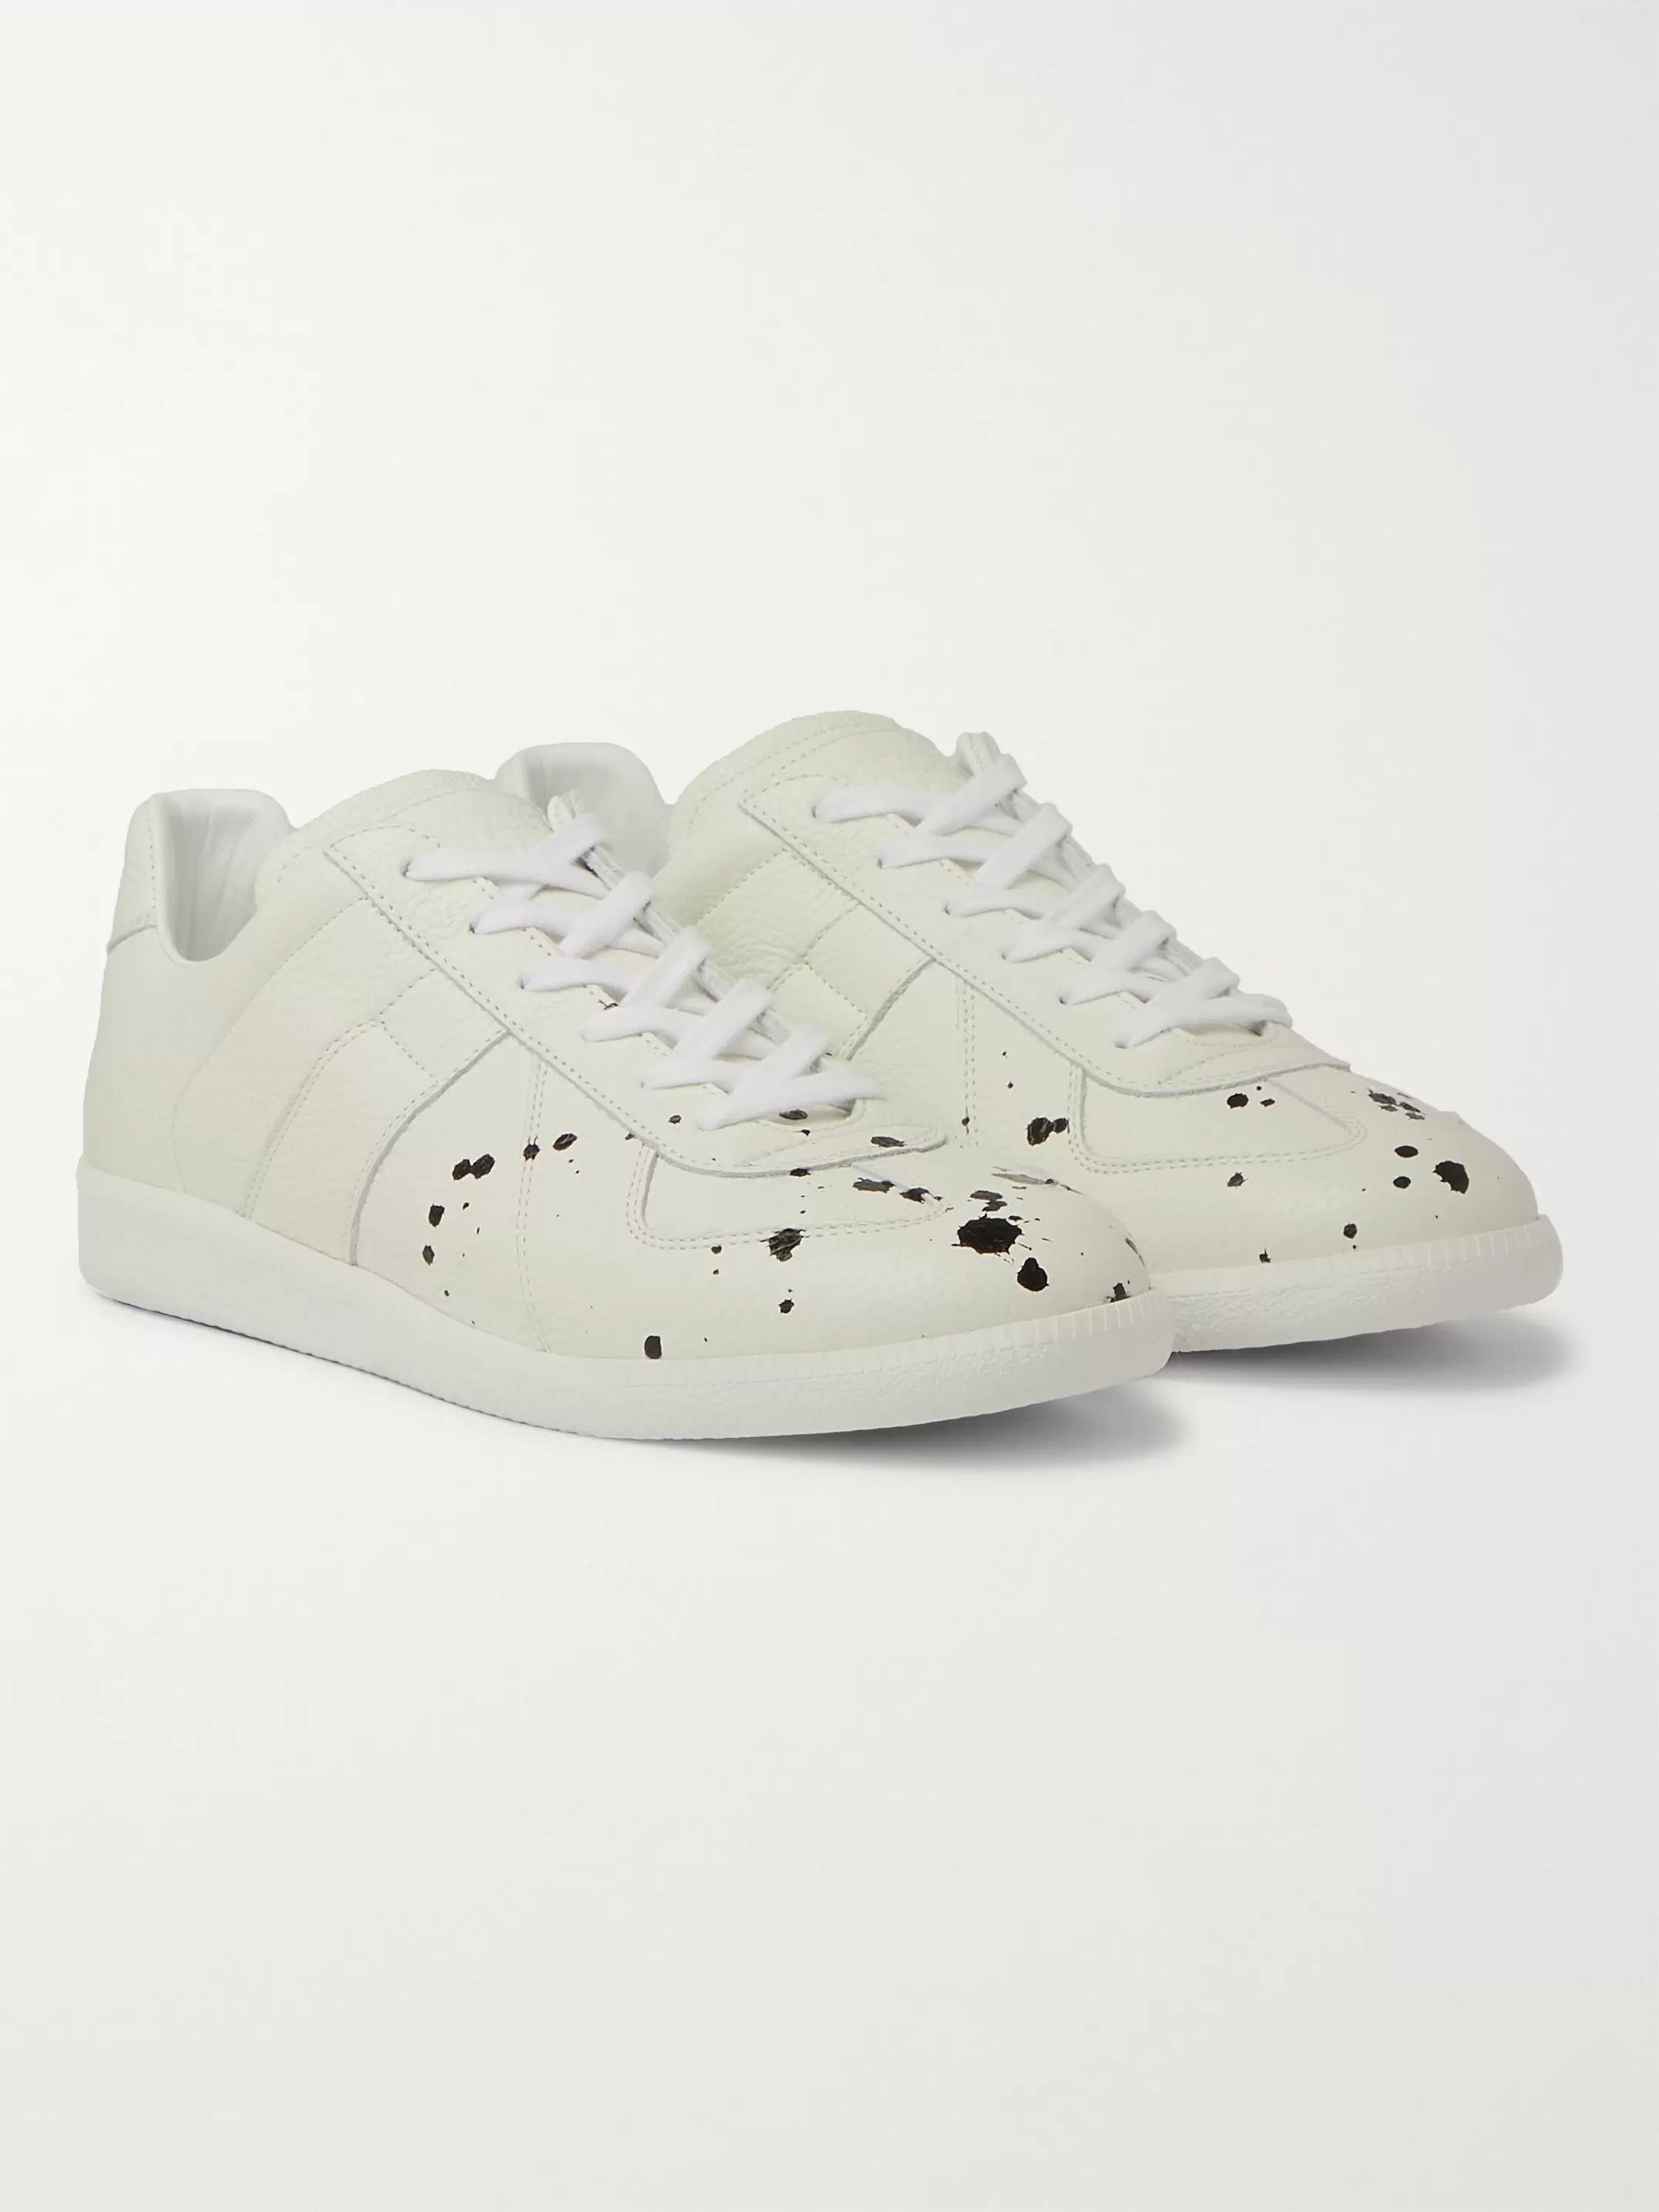 Maison Margiela Painted Sneakers Top Sellers, UP TO 65% OFF | www 